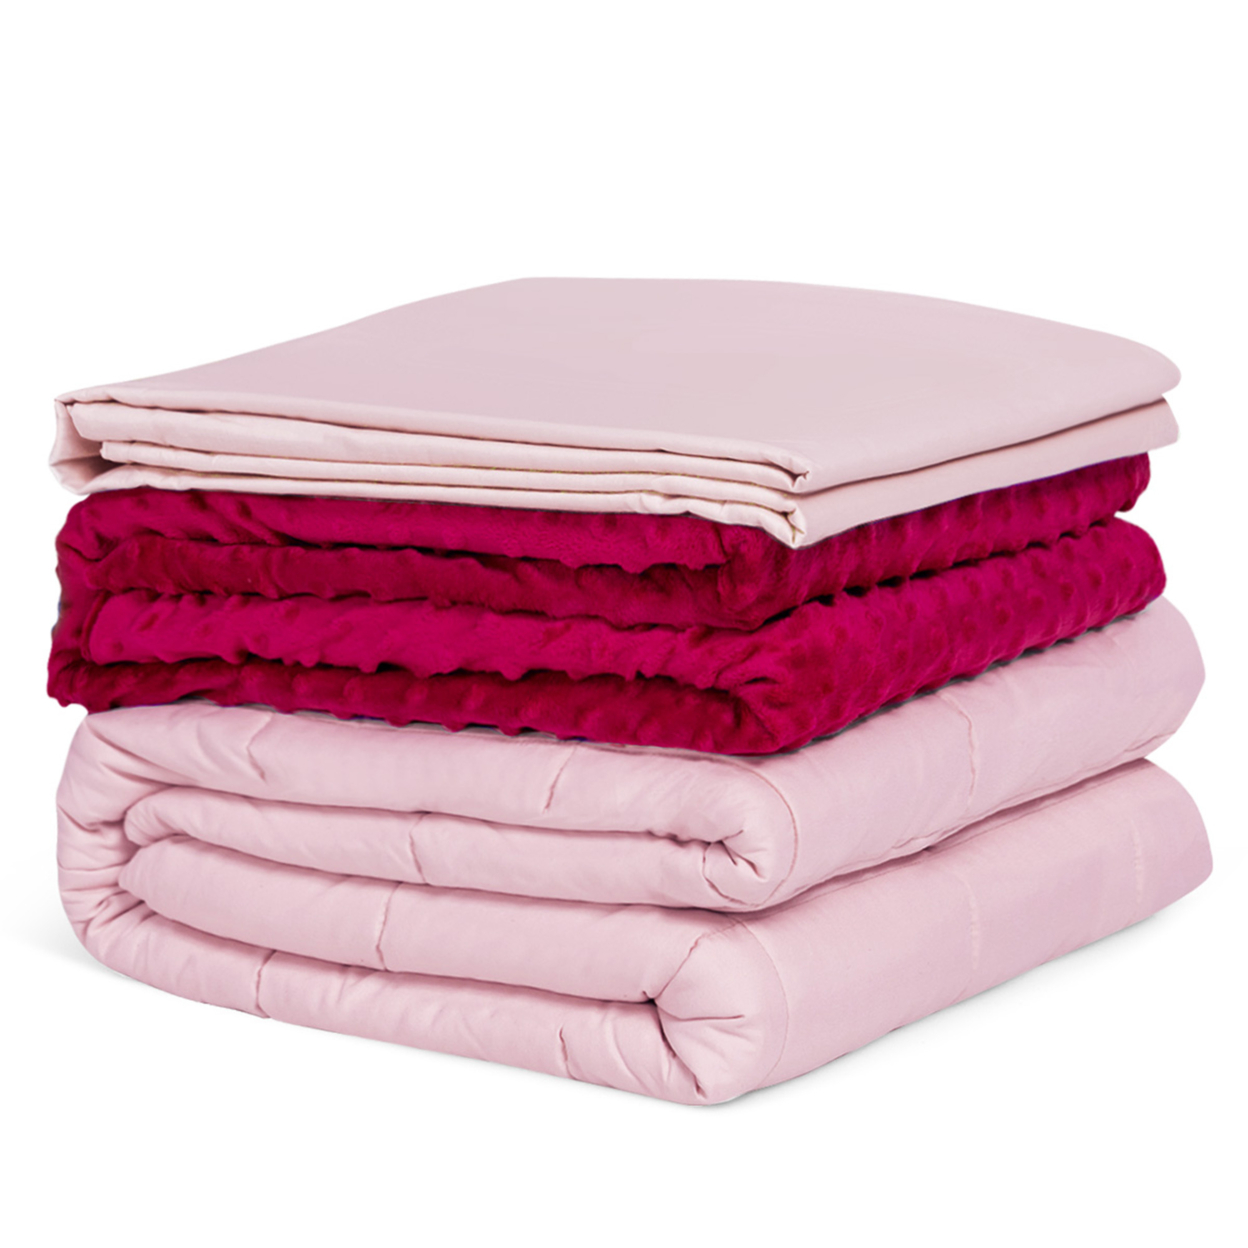 10lbs Heavy Weighted Blanket 3 Piece Set W/Hot & Cold Duvet Covers 41''x60'' Pink